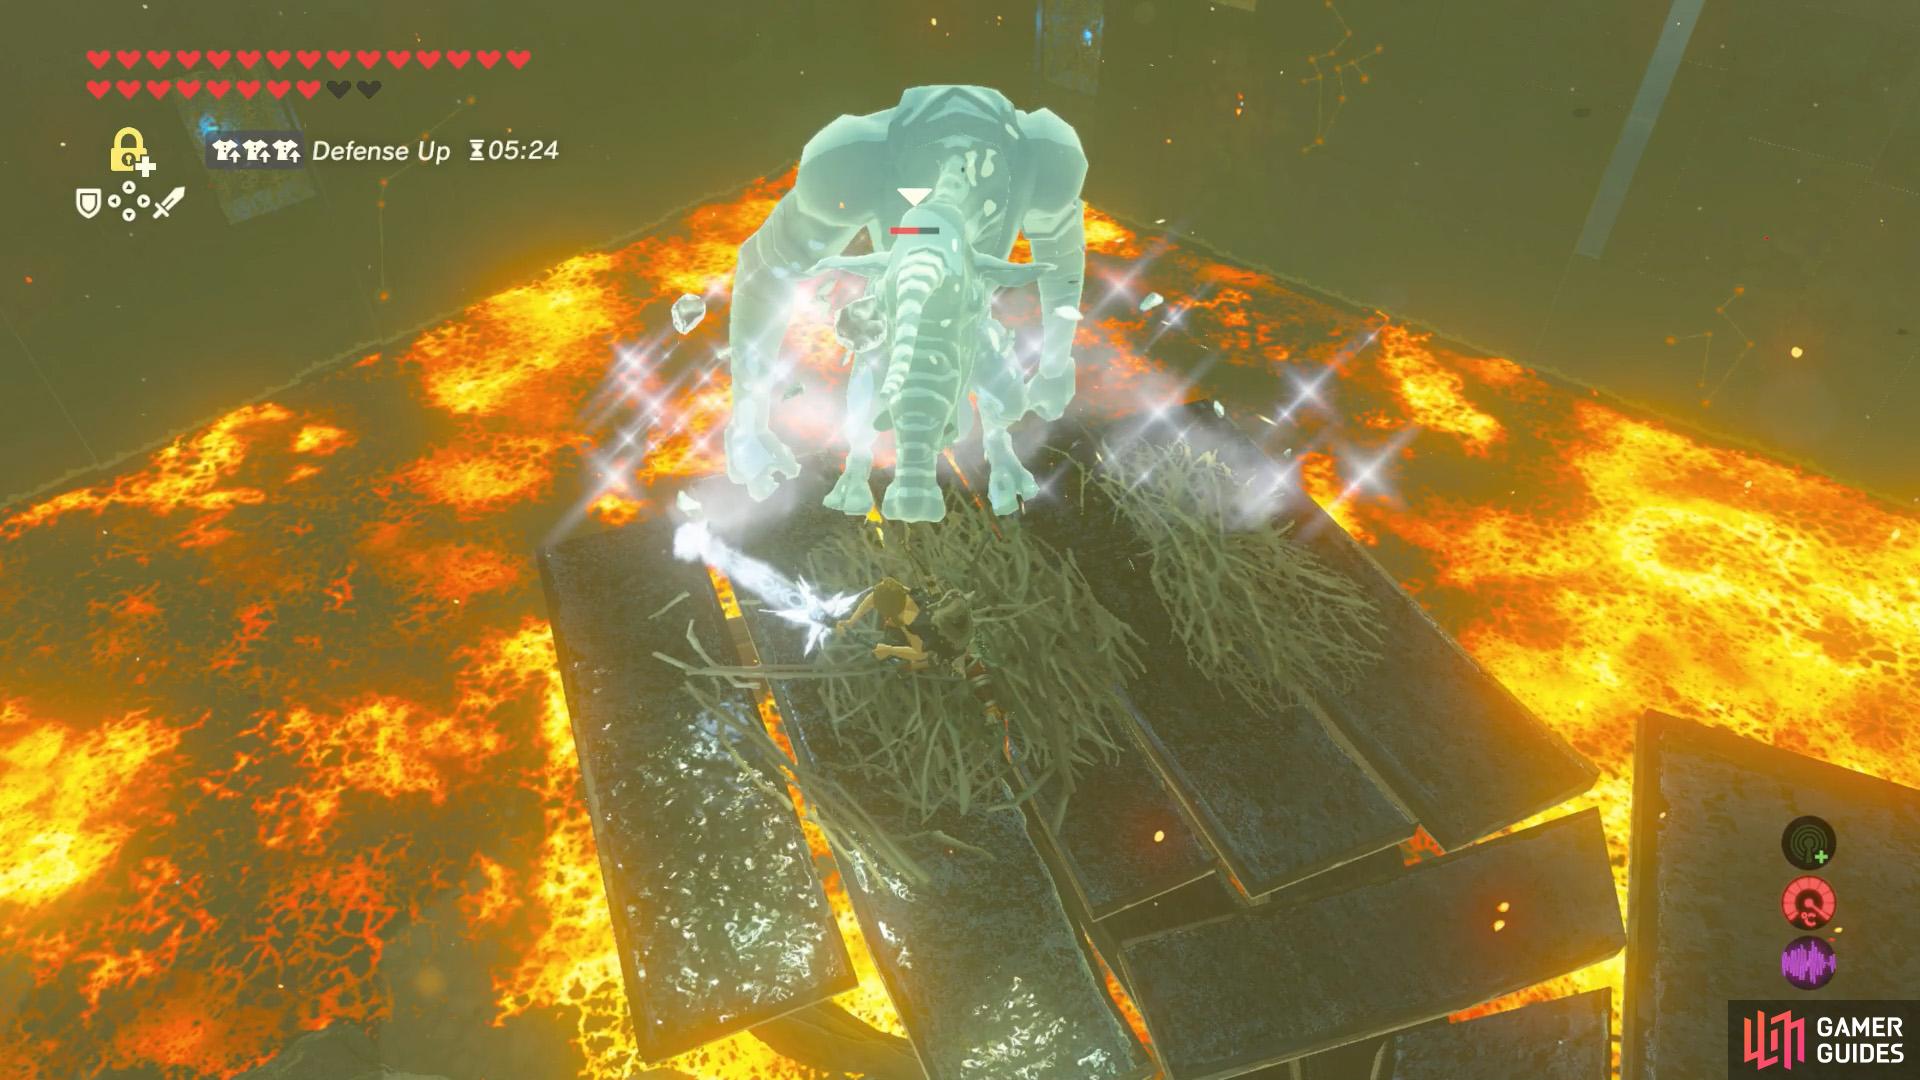 After disarming a Moblin, freeze them with the Frostblade.